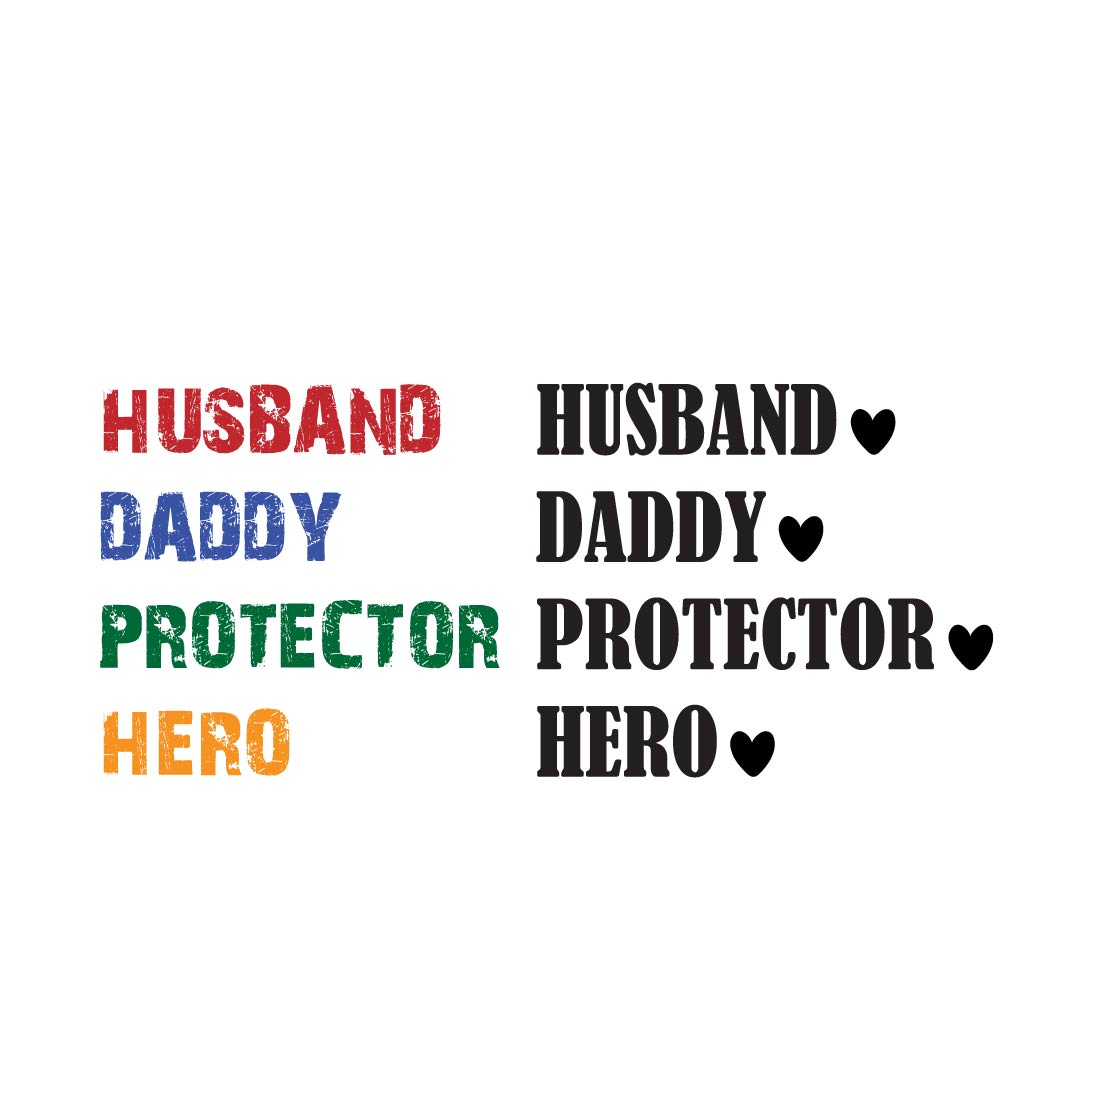 Husband Daddy Protector Hero svg - Dad svg - Father's Day - Funny Dad Shirt Design - Cut File - svg - dxf - eps - png - Silhouette - Cricut preview image.